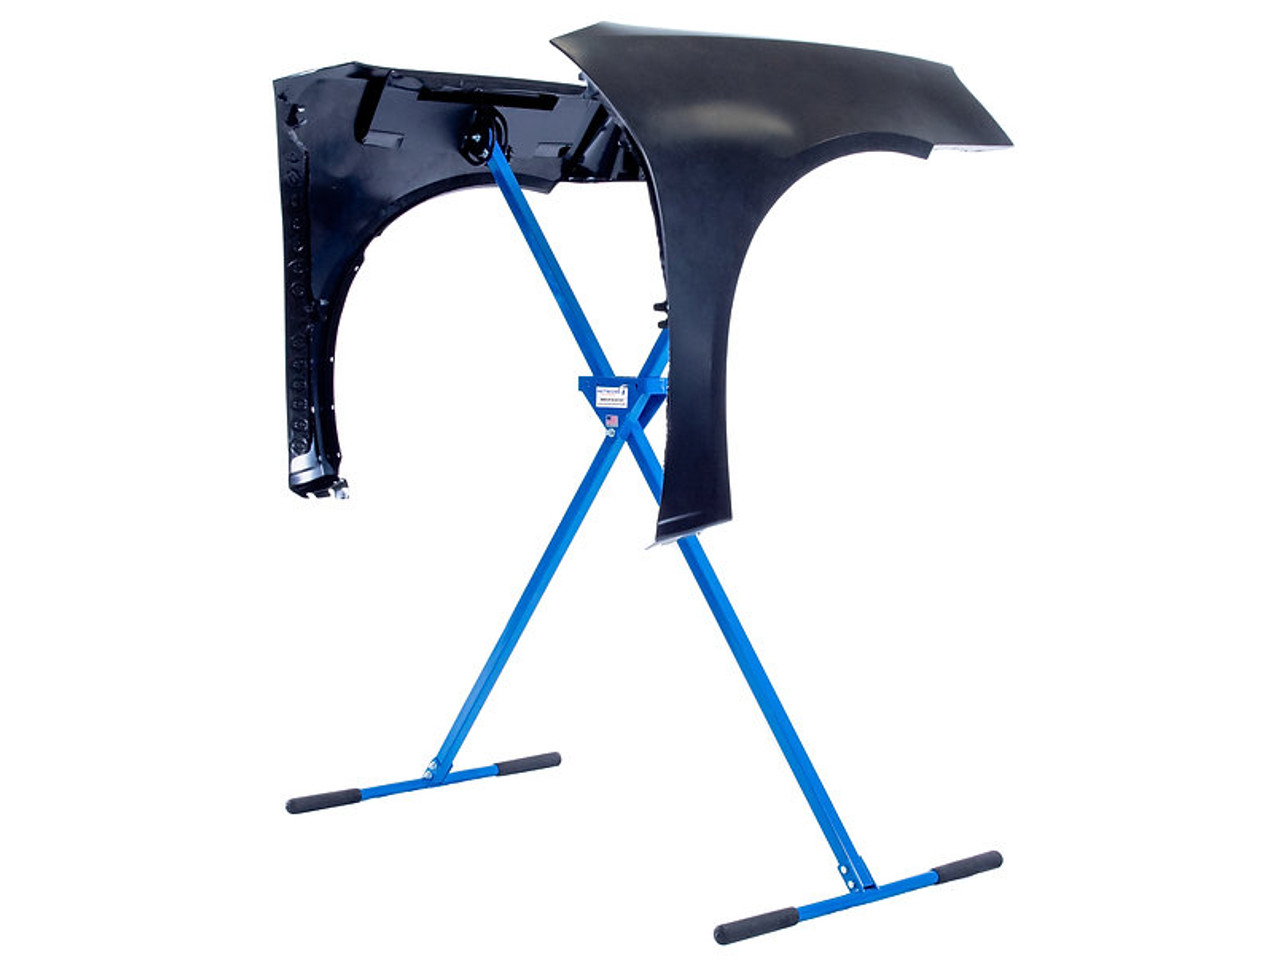 Lift King LK5500 Extreme Paint Stand for Light Duty Lift